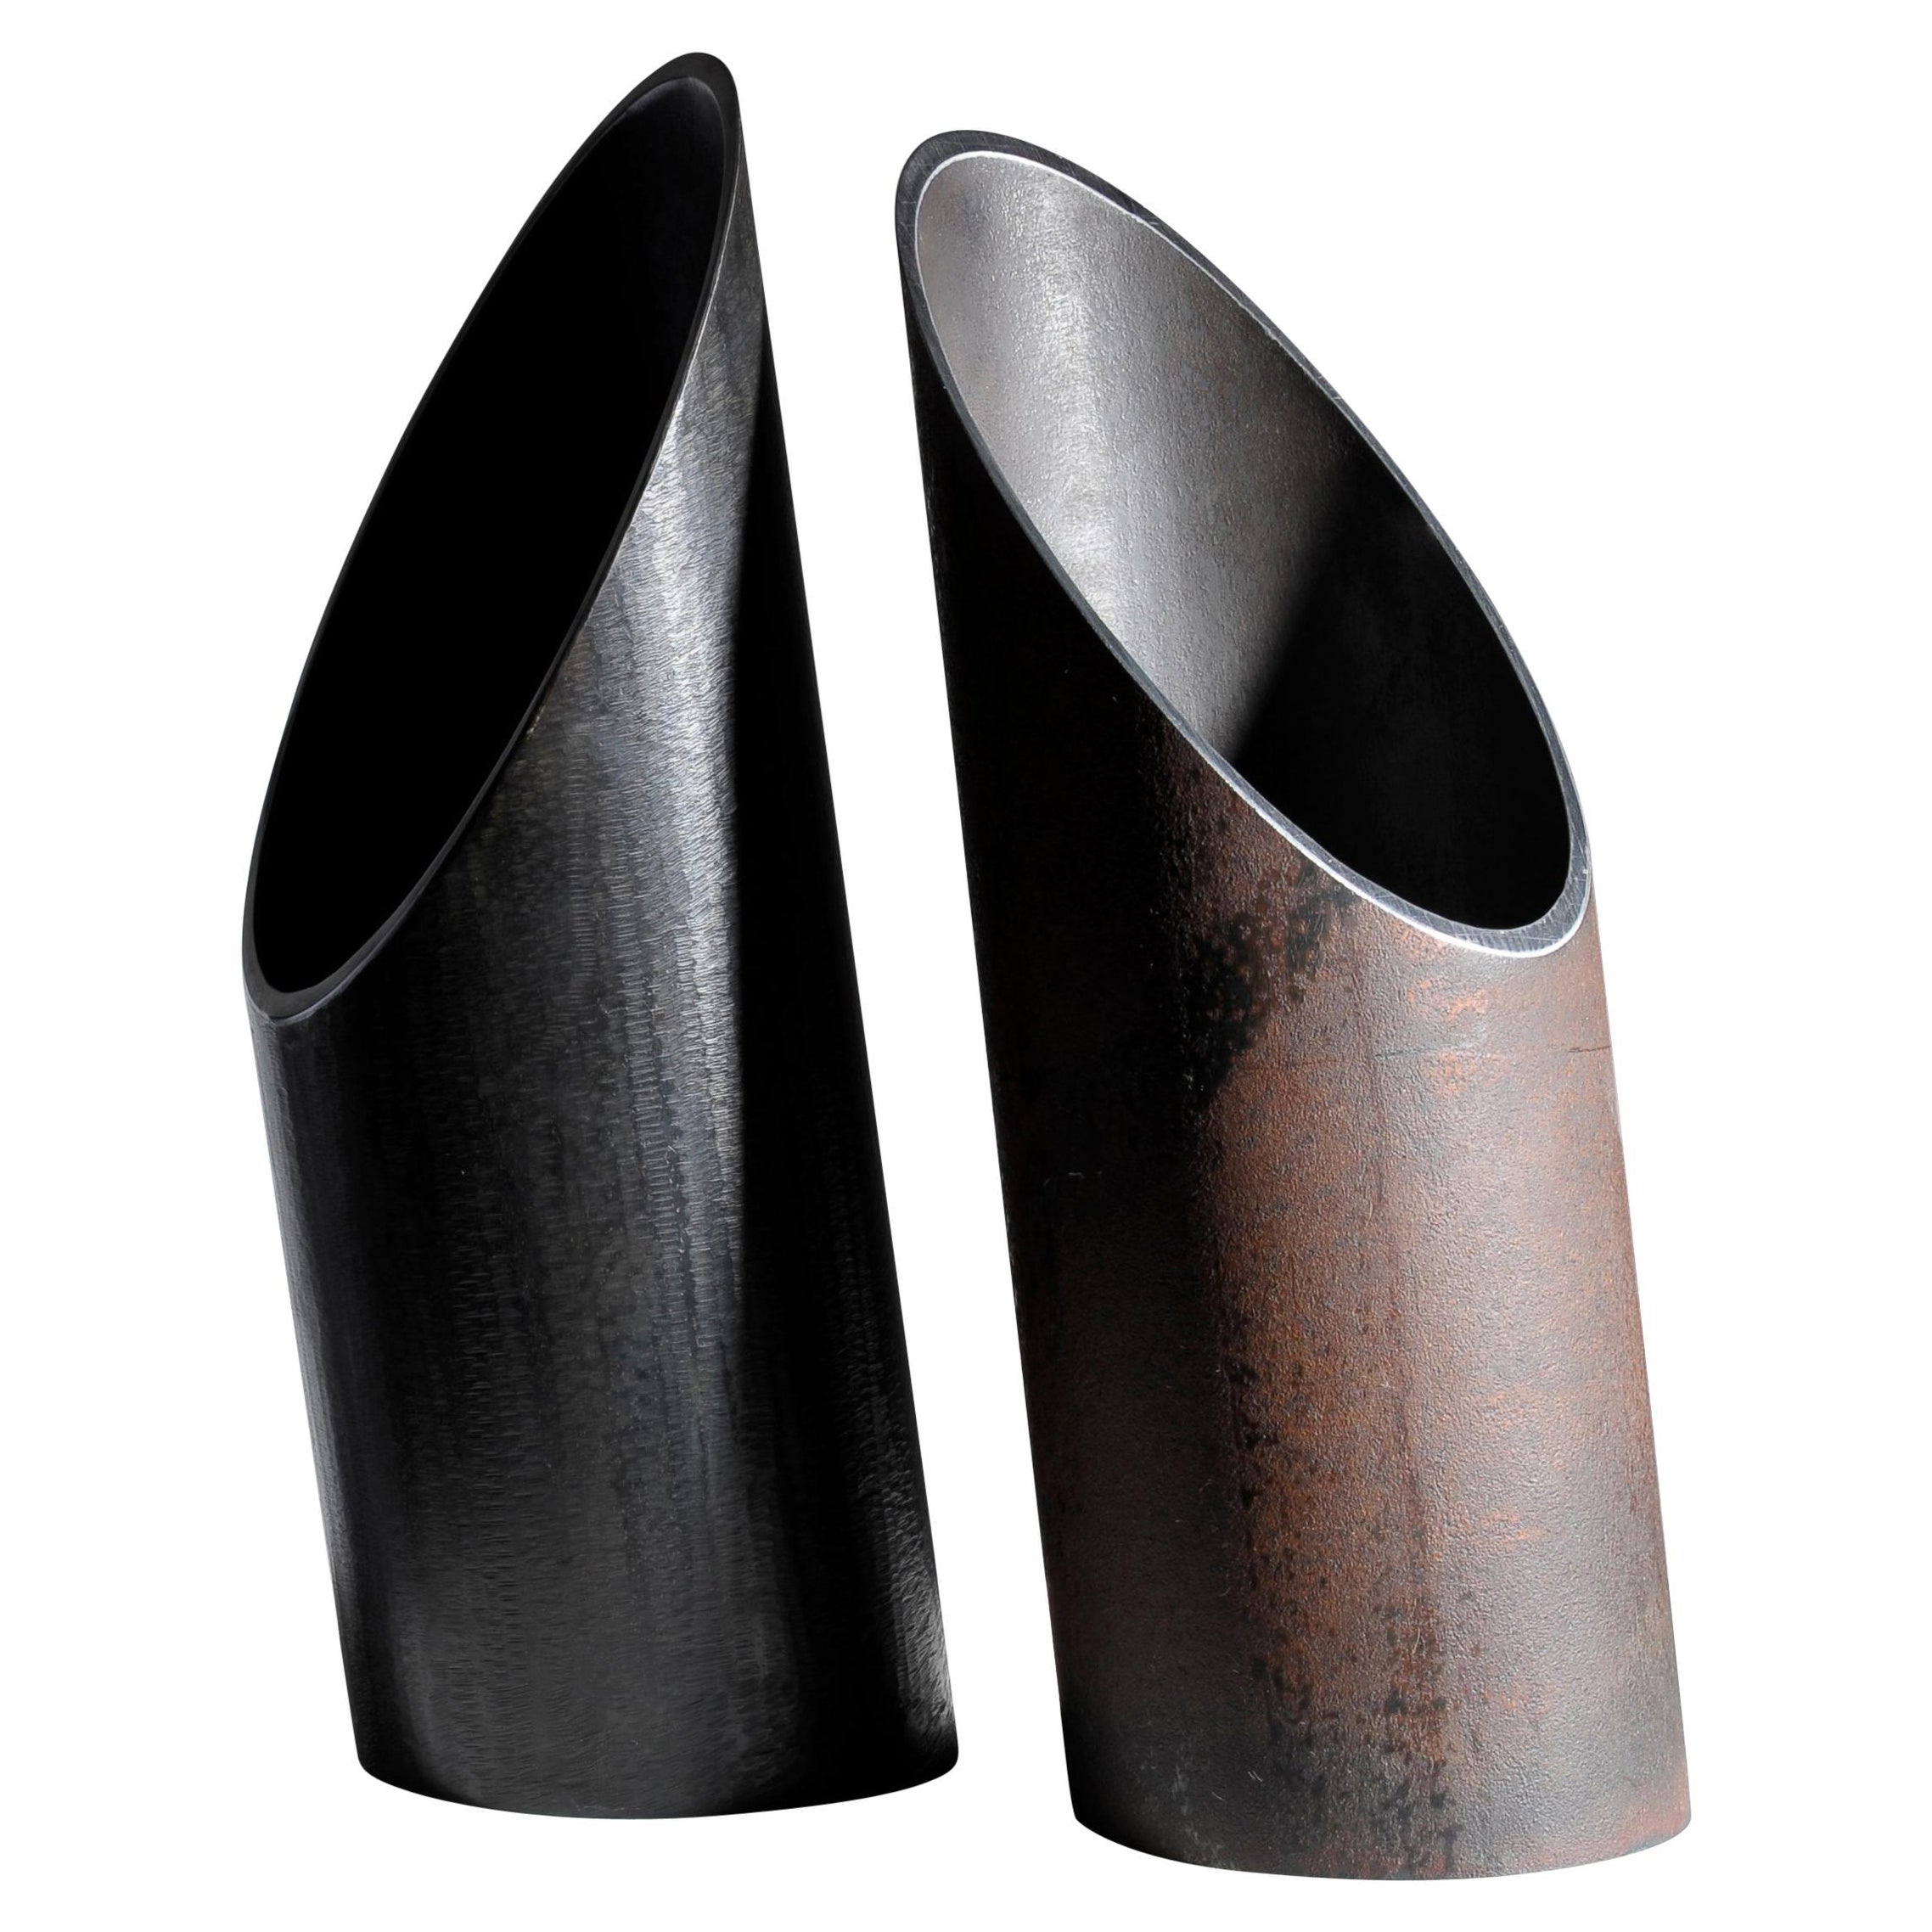 Pipe, Pair of Steel Sculpted Vases, Signed by Lukasz Friedrich